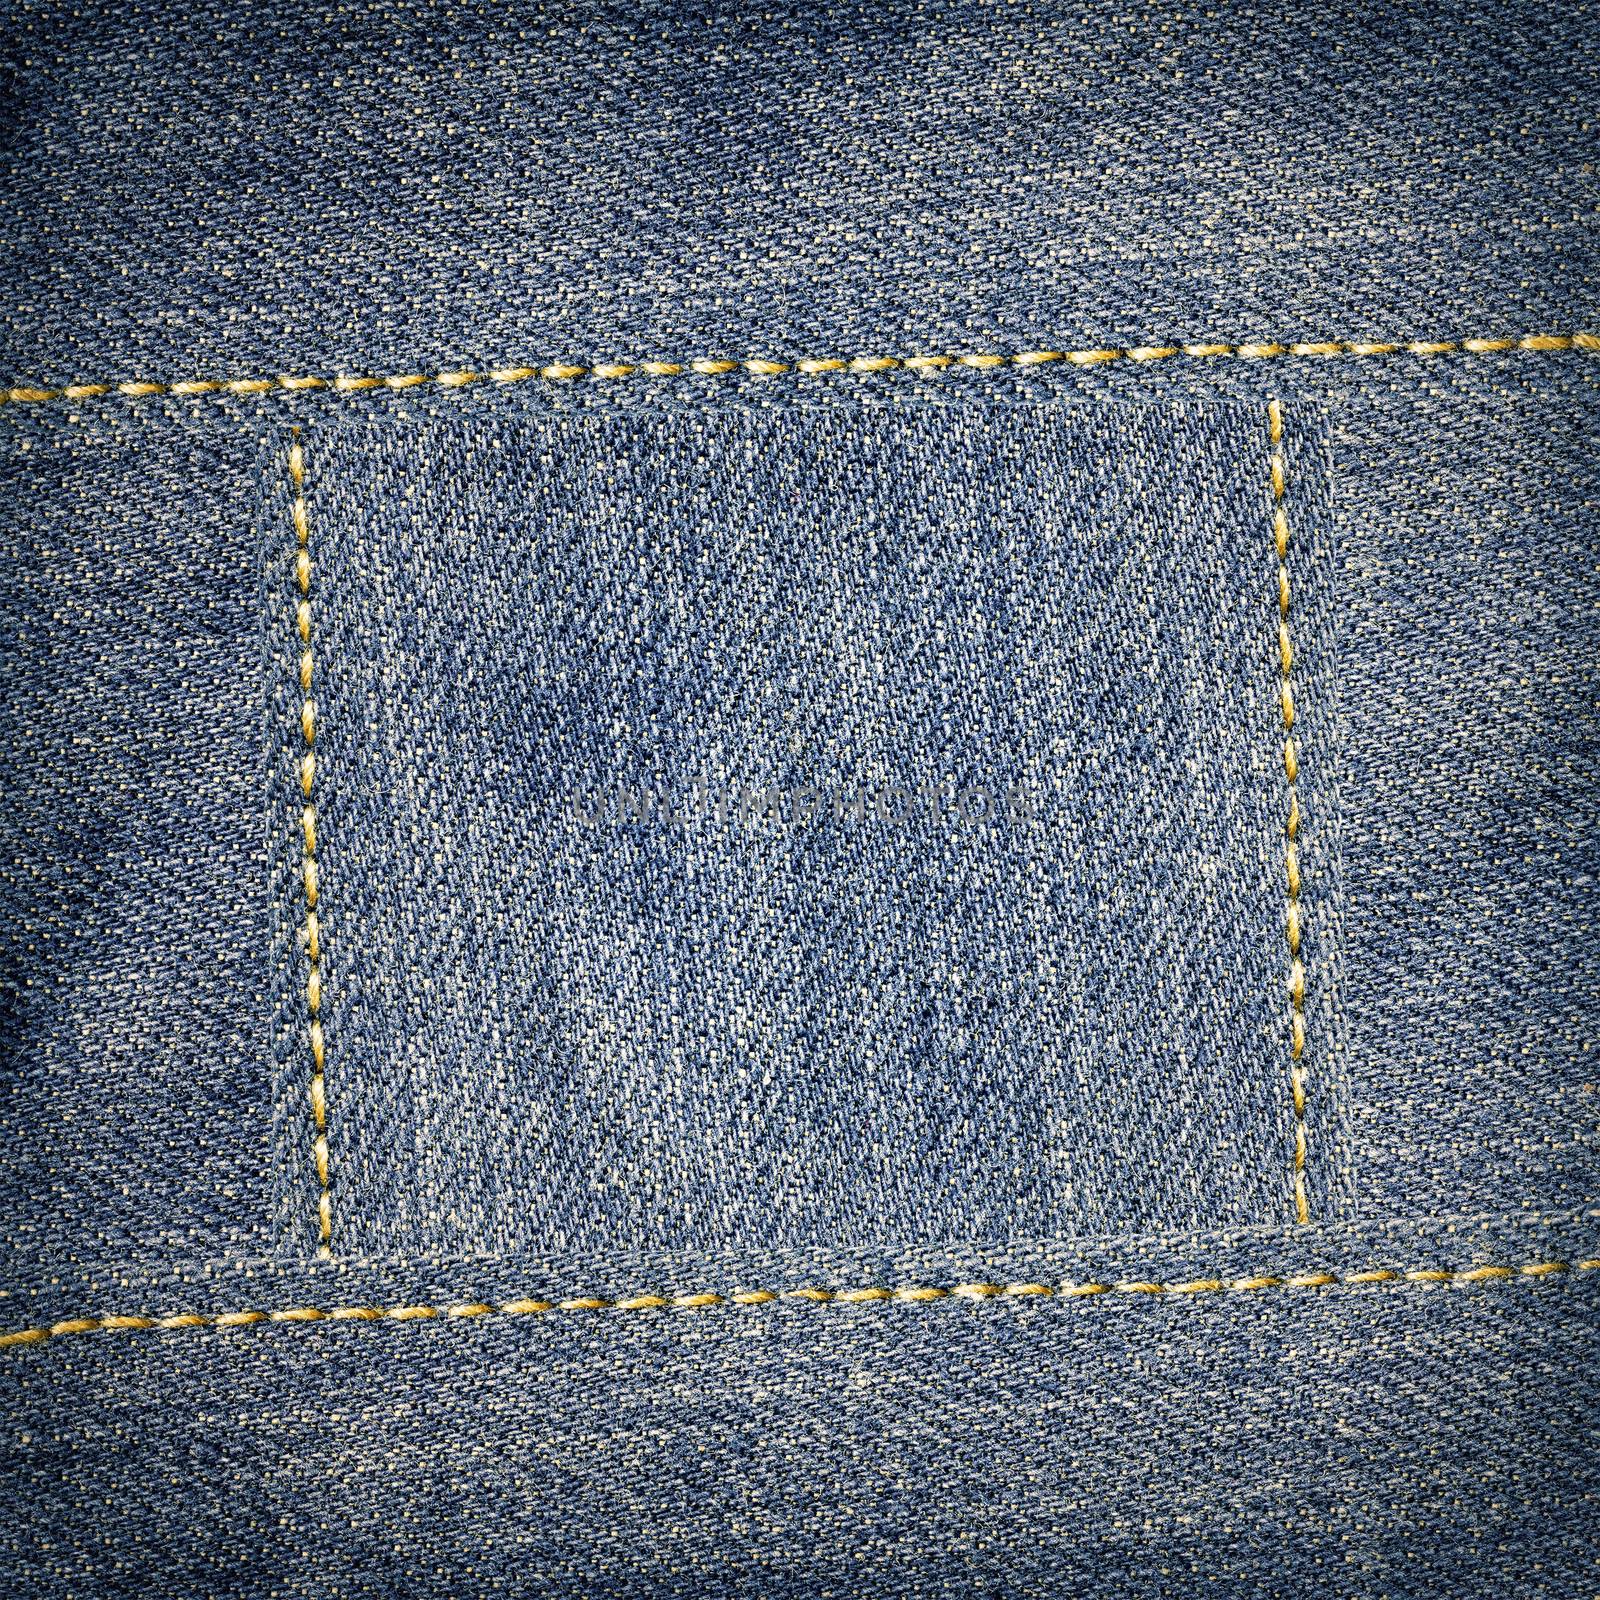 Jeans texture with yellow seams frame background